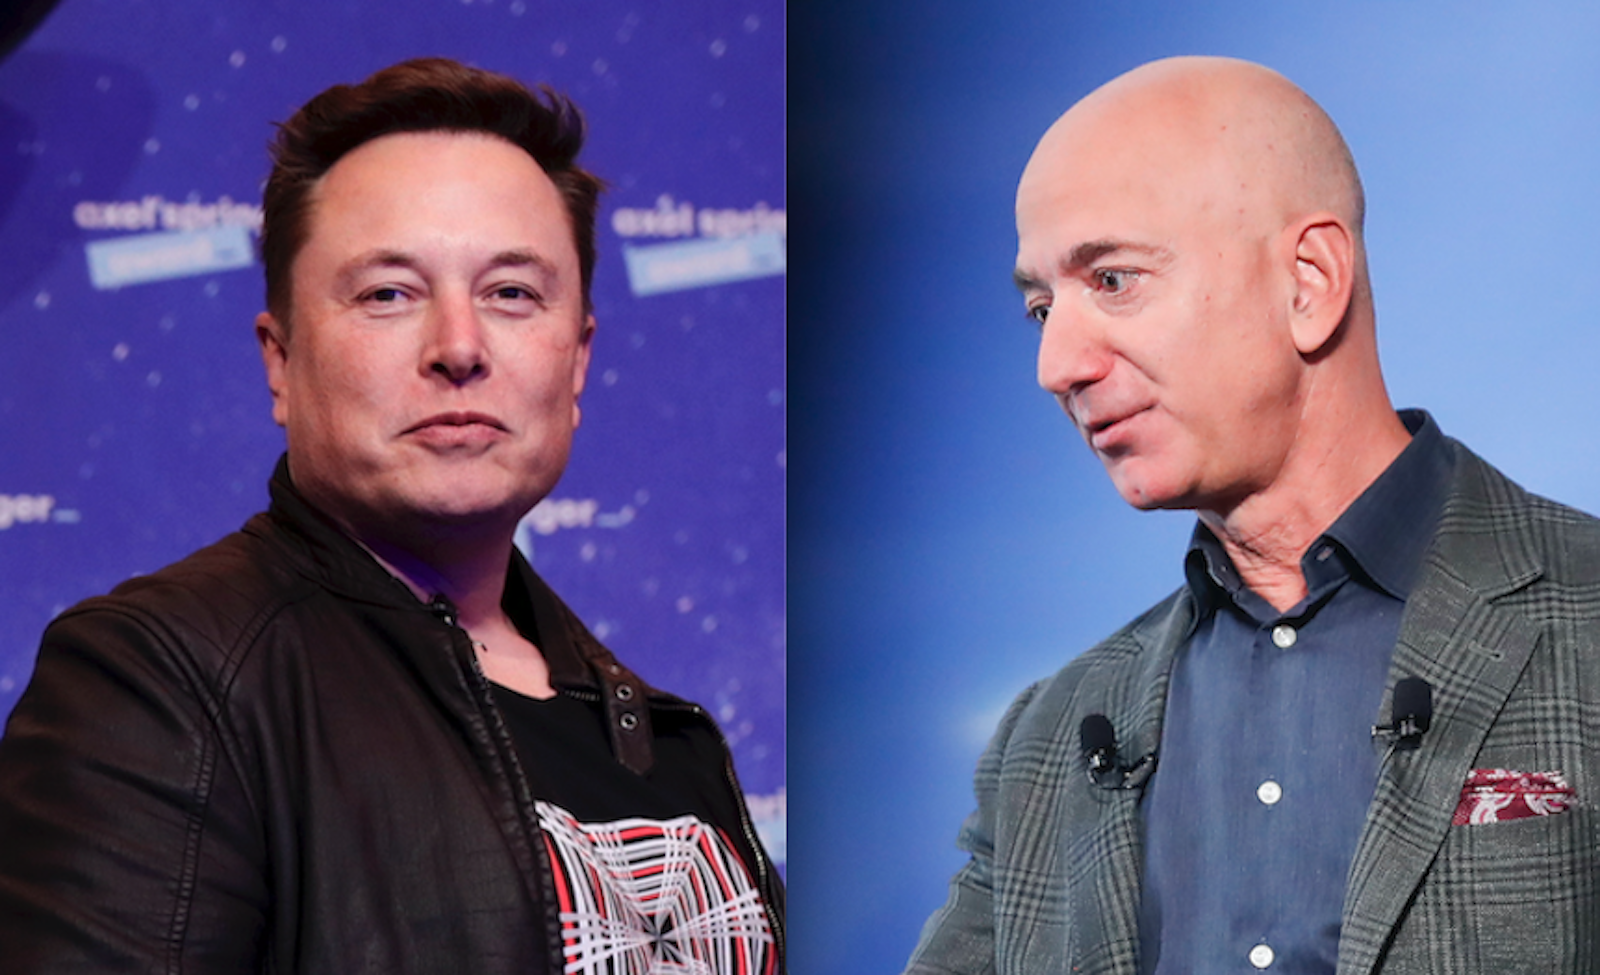 How generous are Elon Musk and Jeff Bezos?